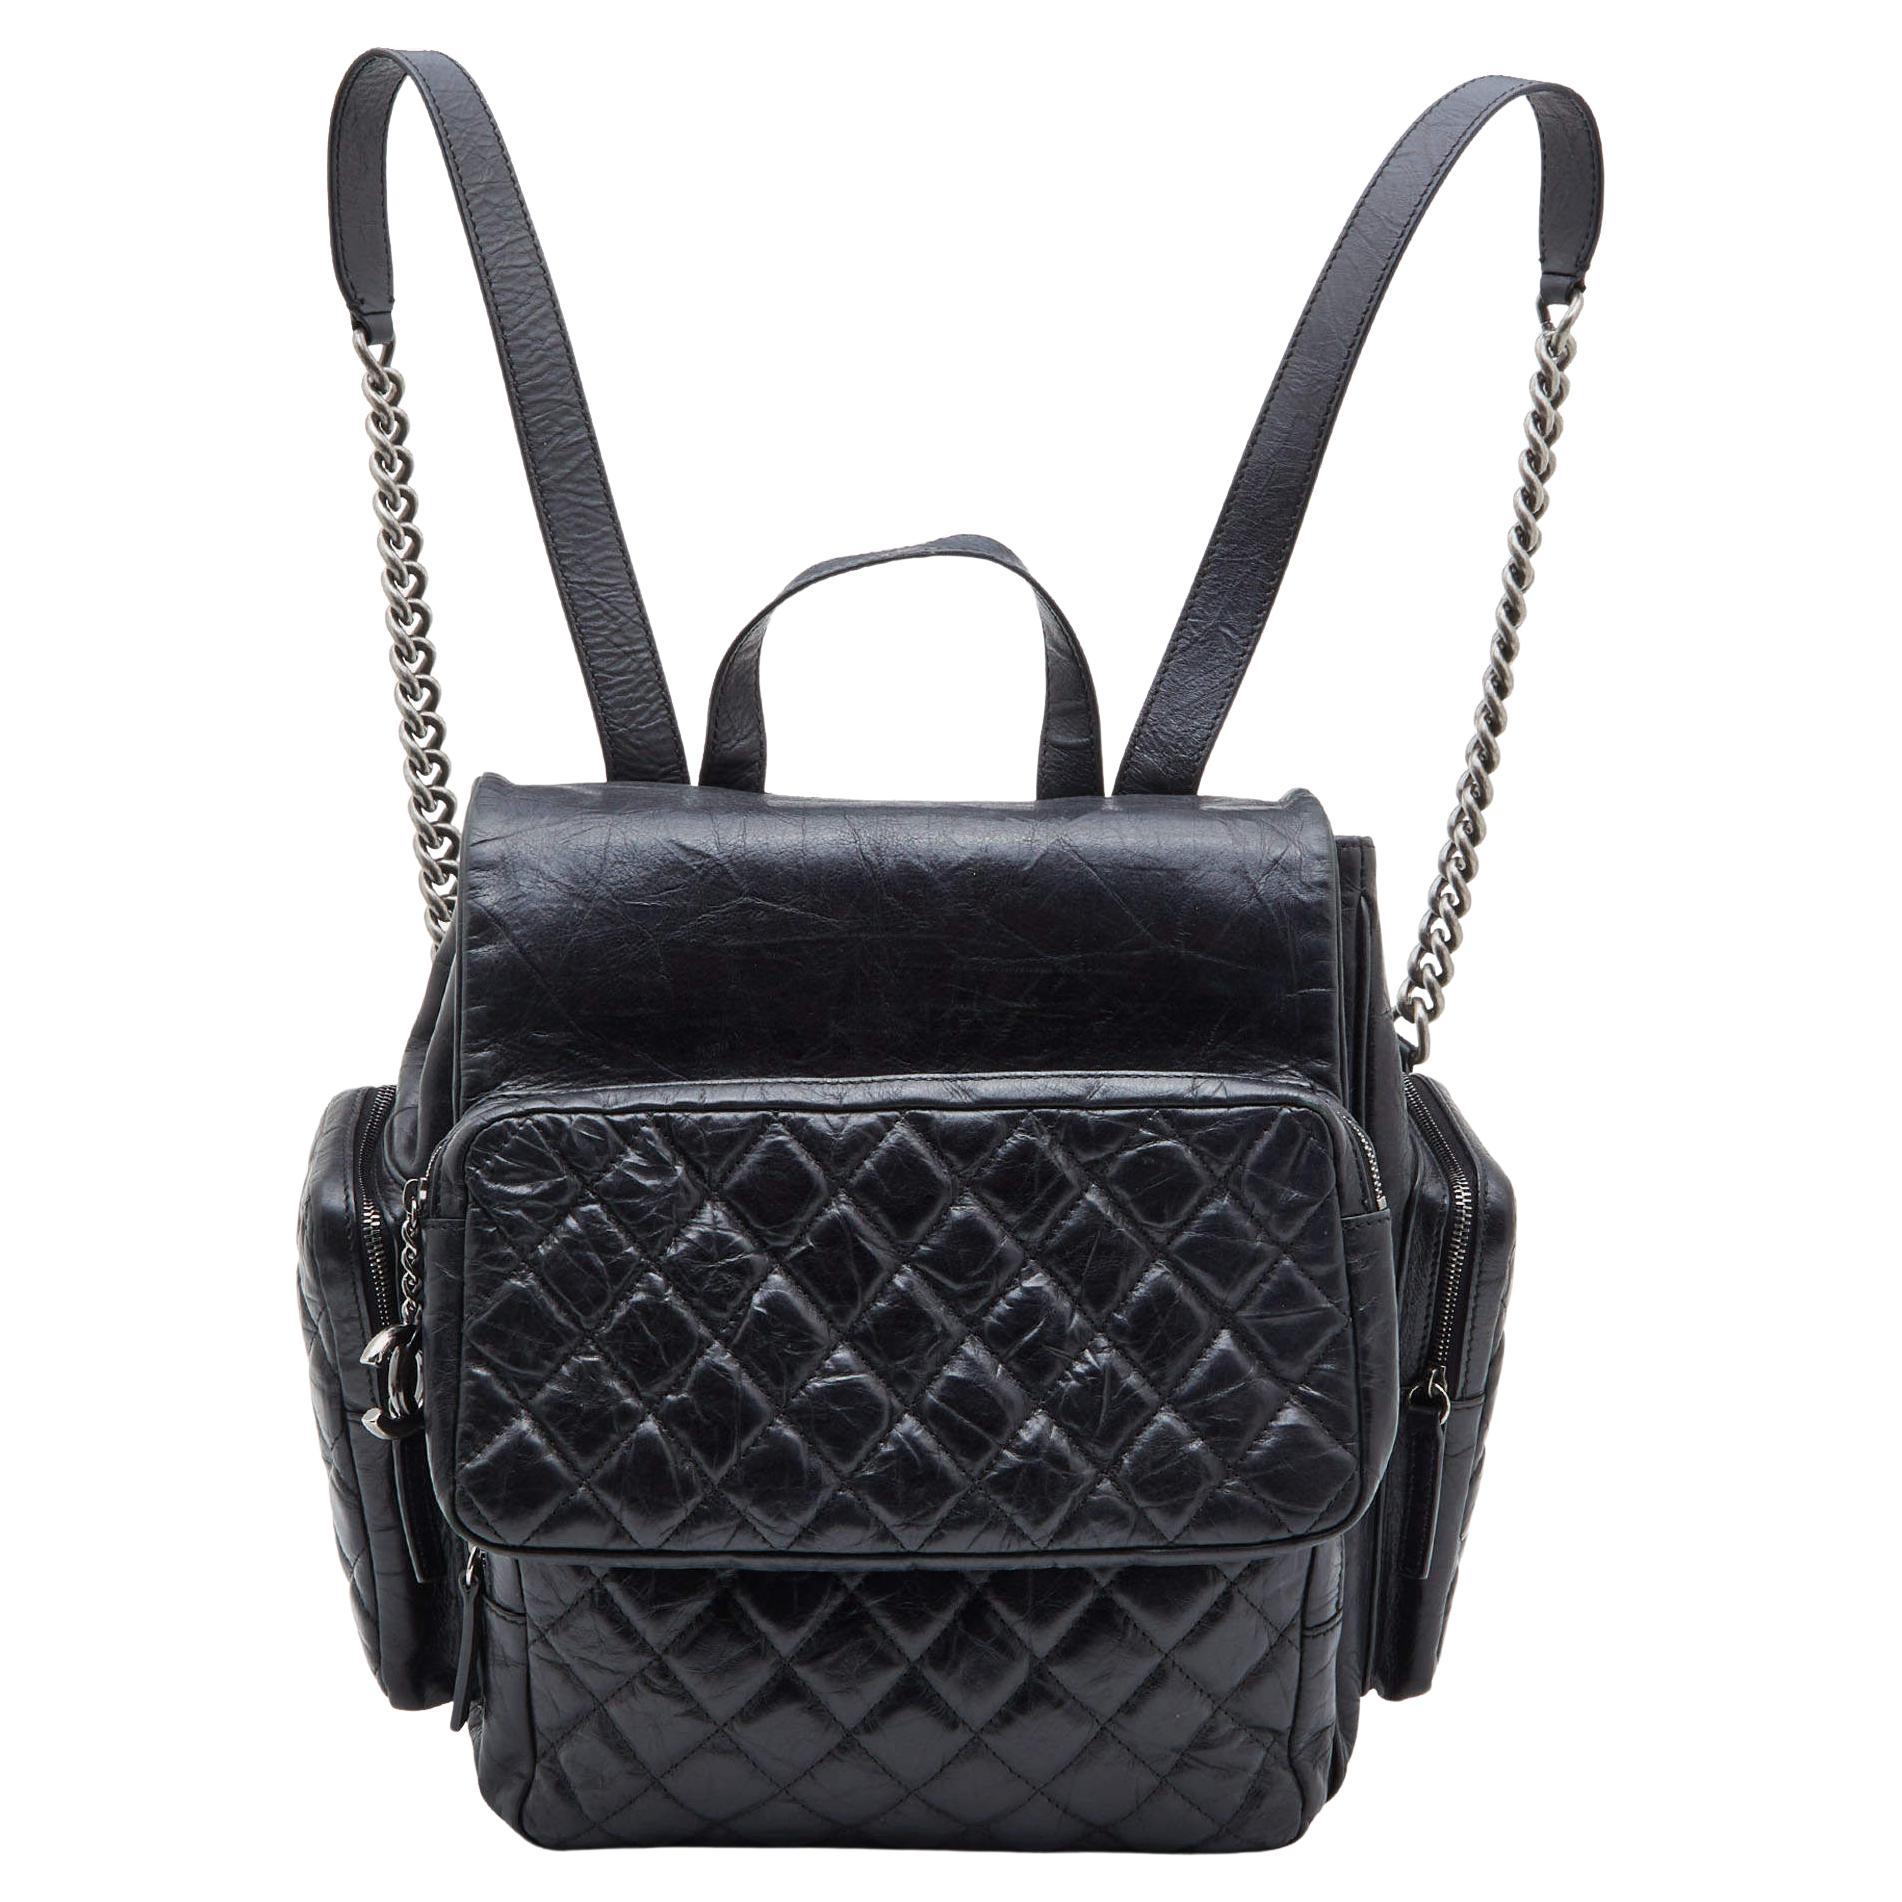 Chanel Black Quilted Leather Casual Rock Backpack